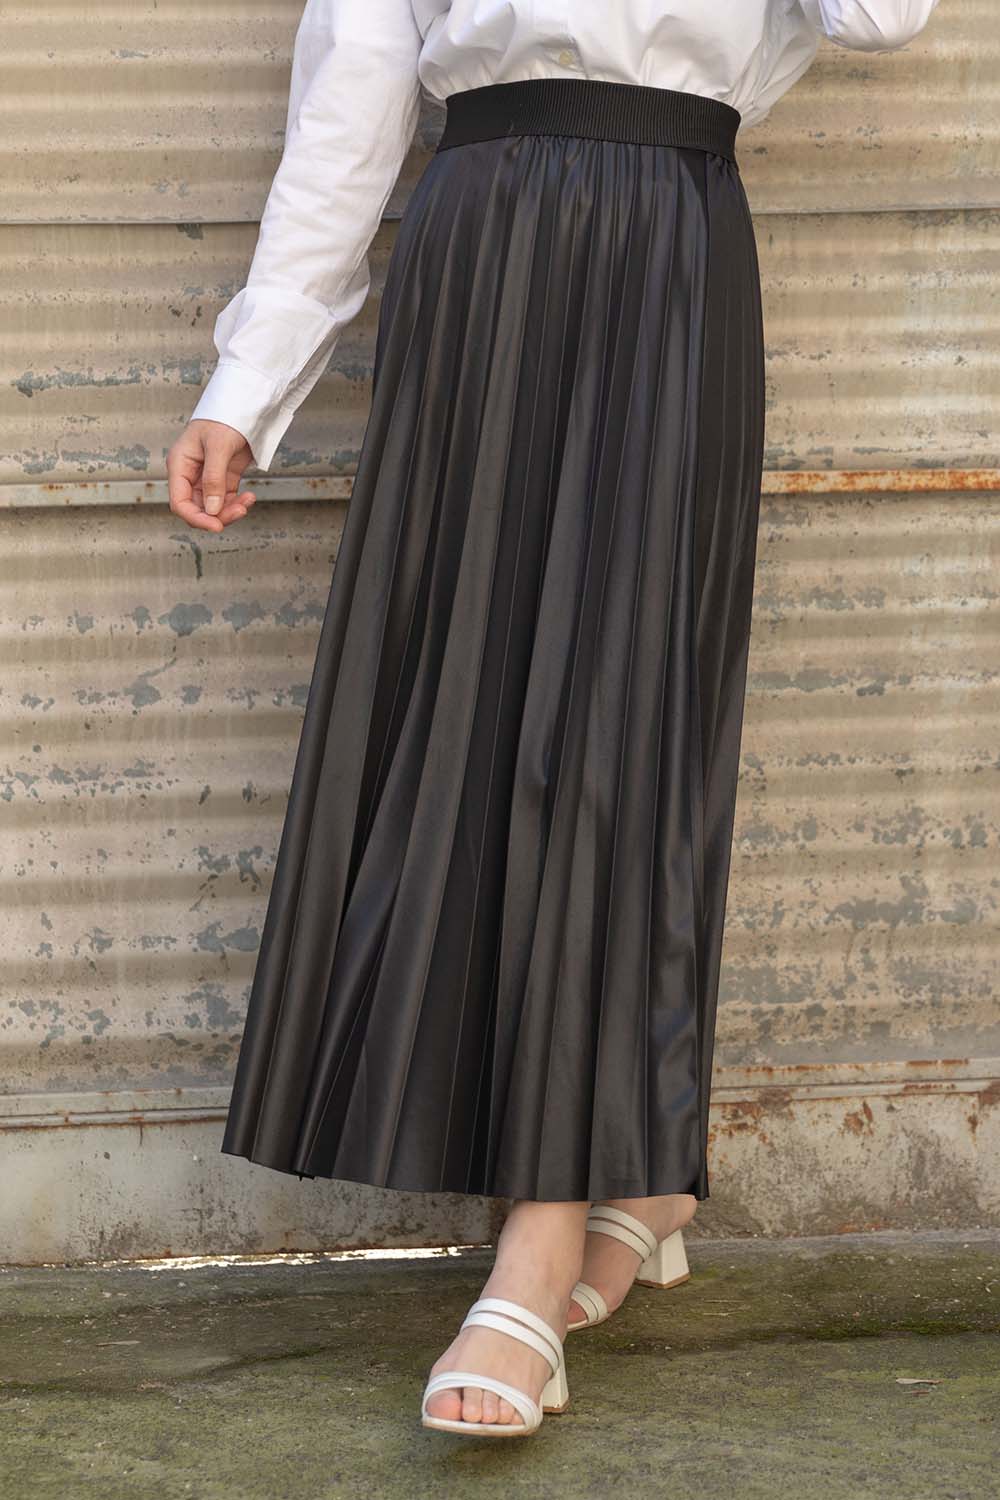 Black and Taupe Printed Maxi Skirt | Printed maxi skirts, Maxi skirt, How  to wear leggings